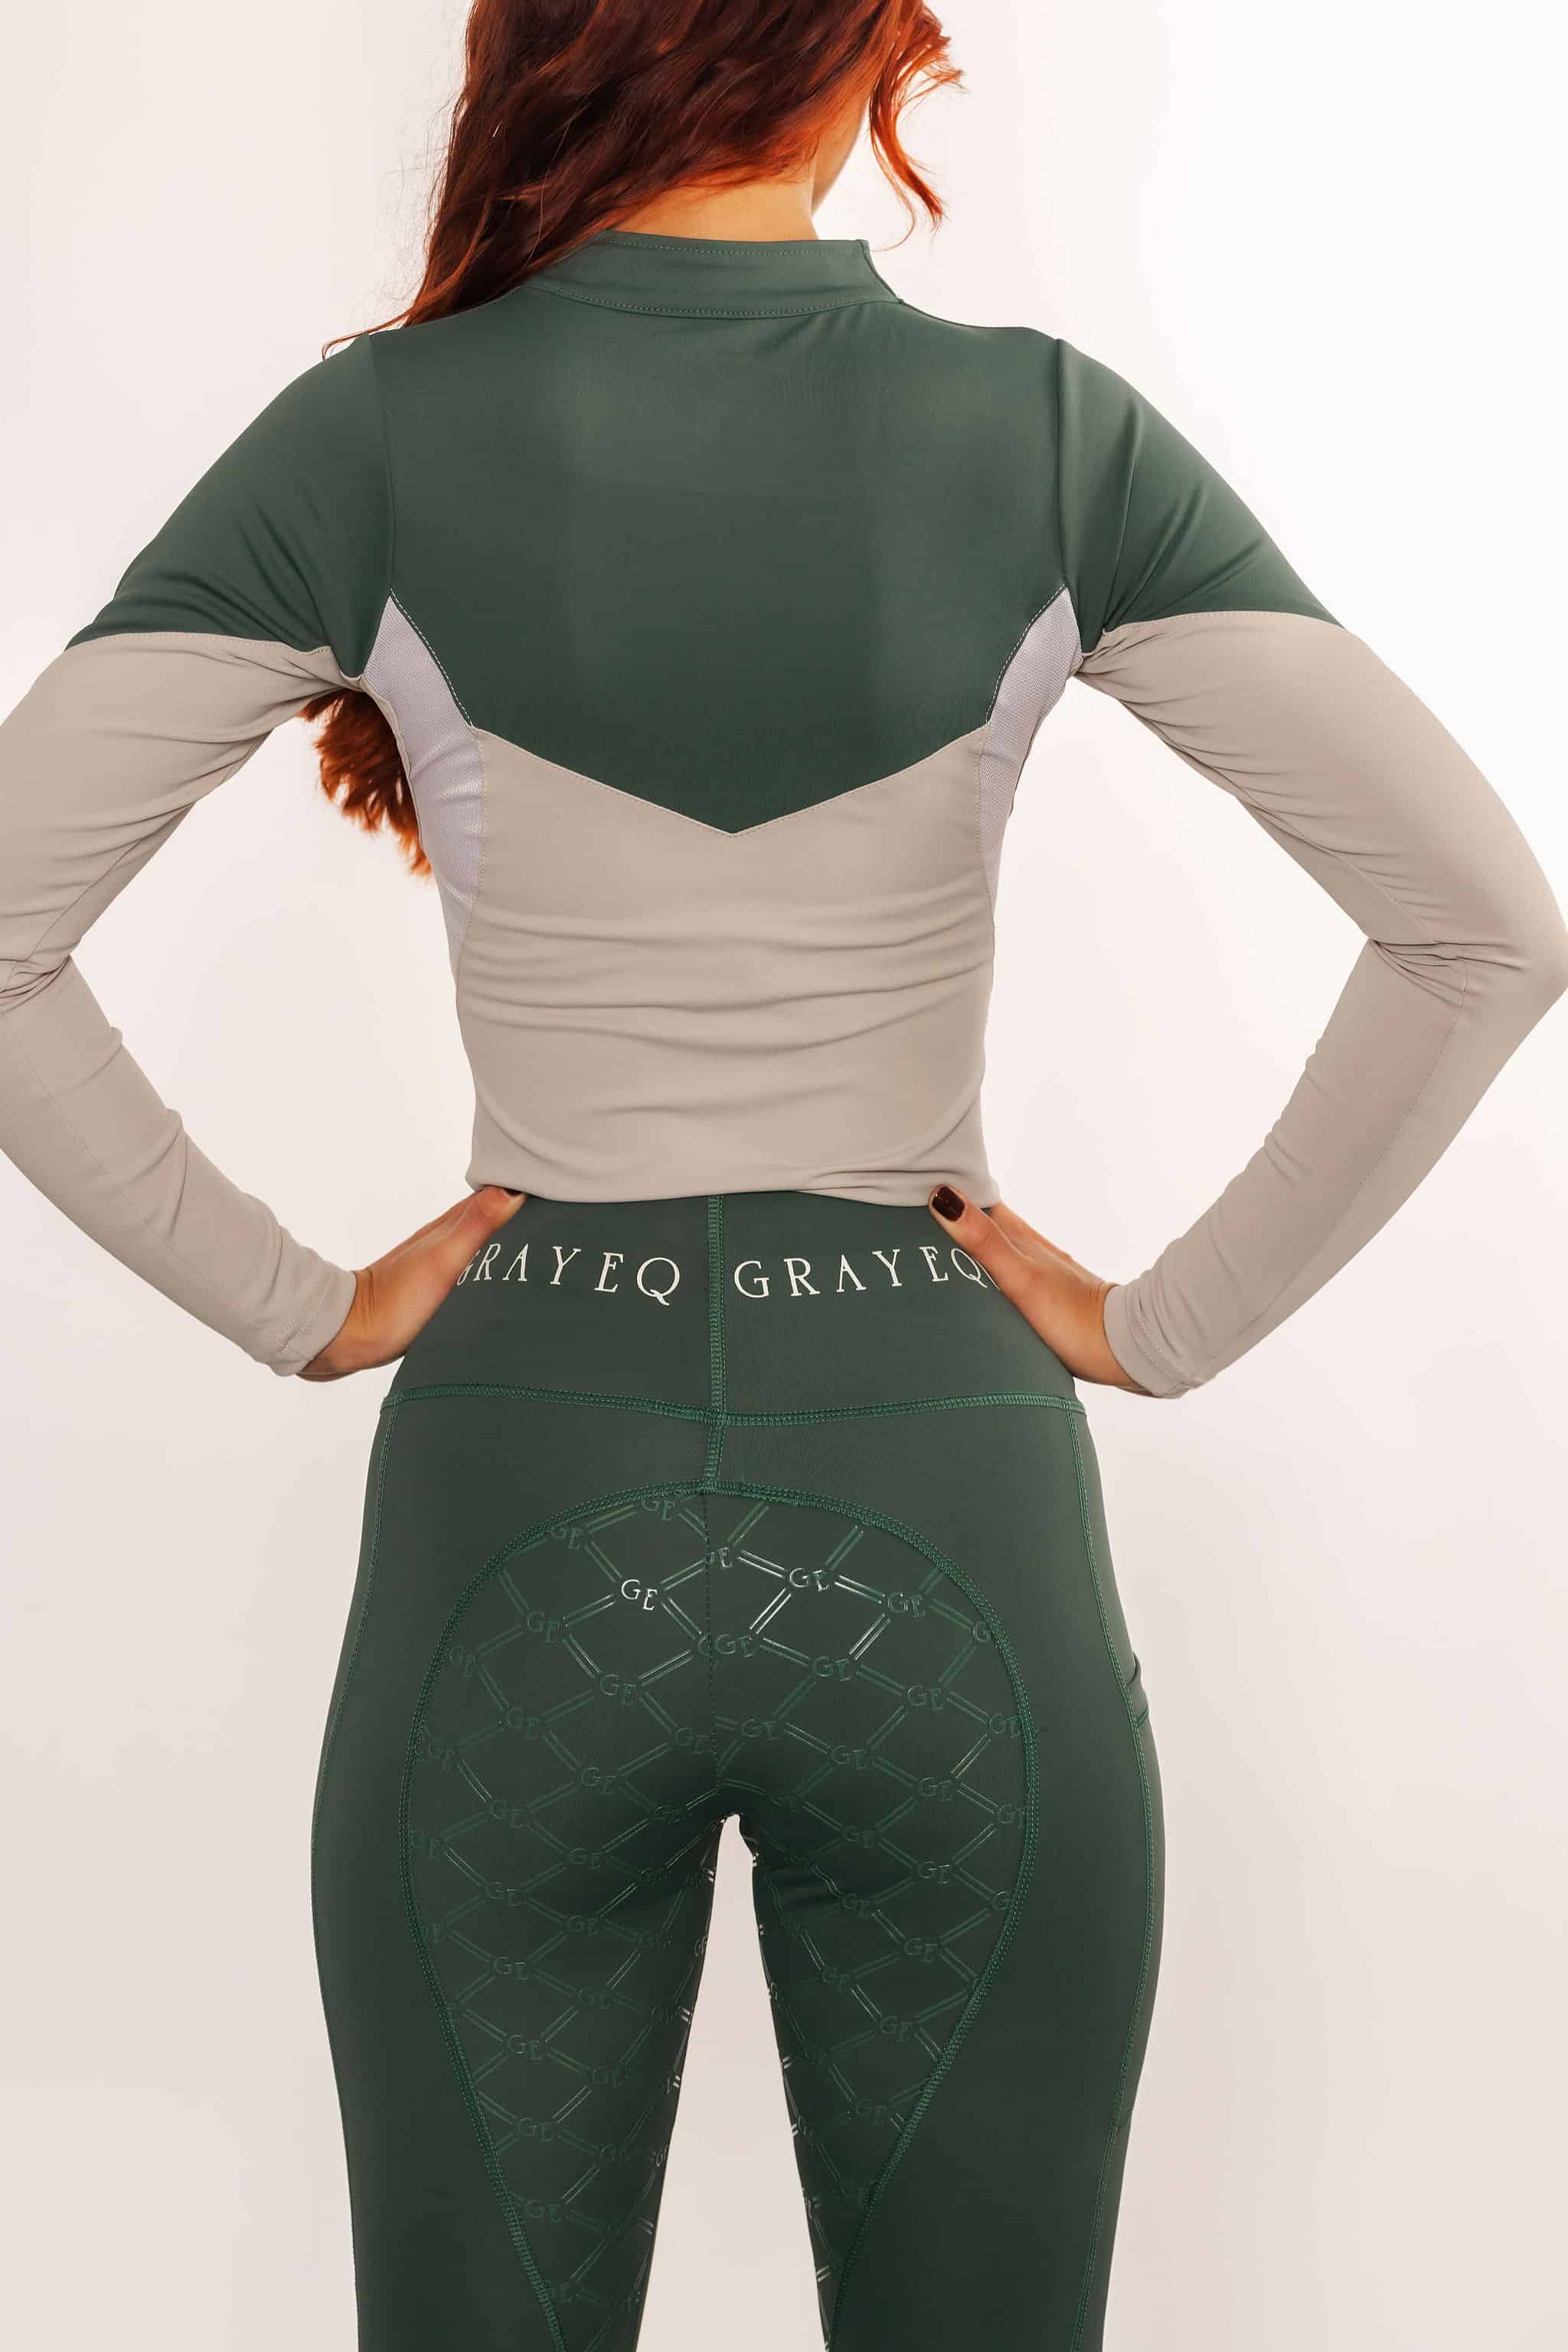 The back of our green and grey two toned base later with matching green leggings with full non-slip seat.